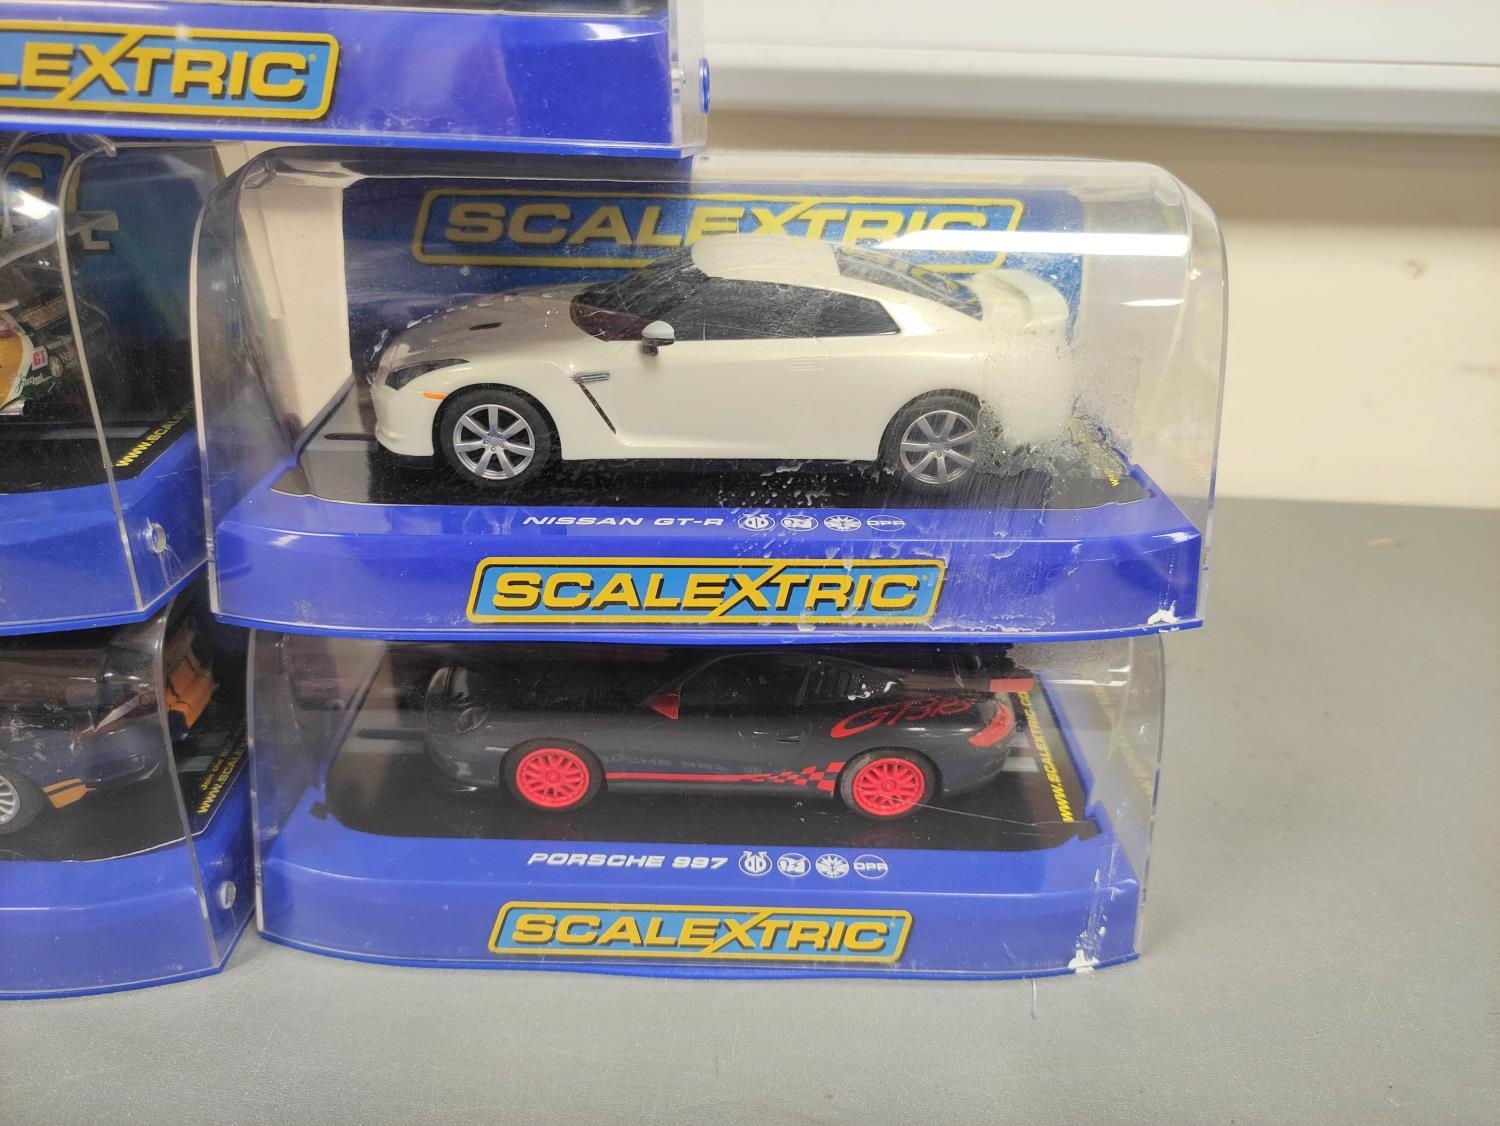 Scalextric. Five 1/32 scale racing car models in perspex cases to include Porsche 997 C3079, - Image 4 of 6